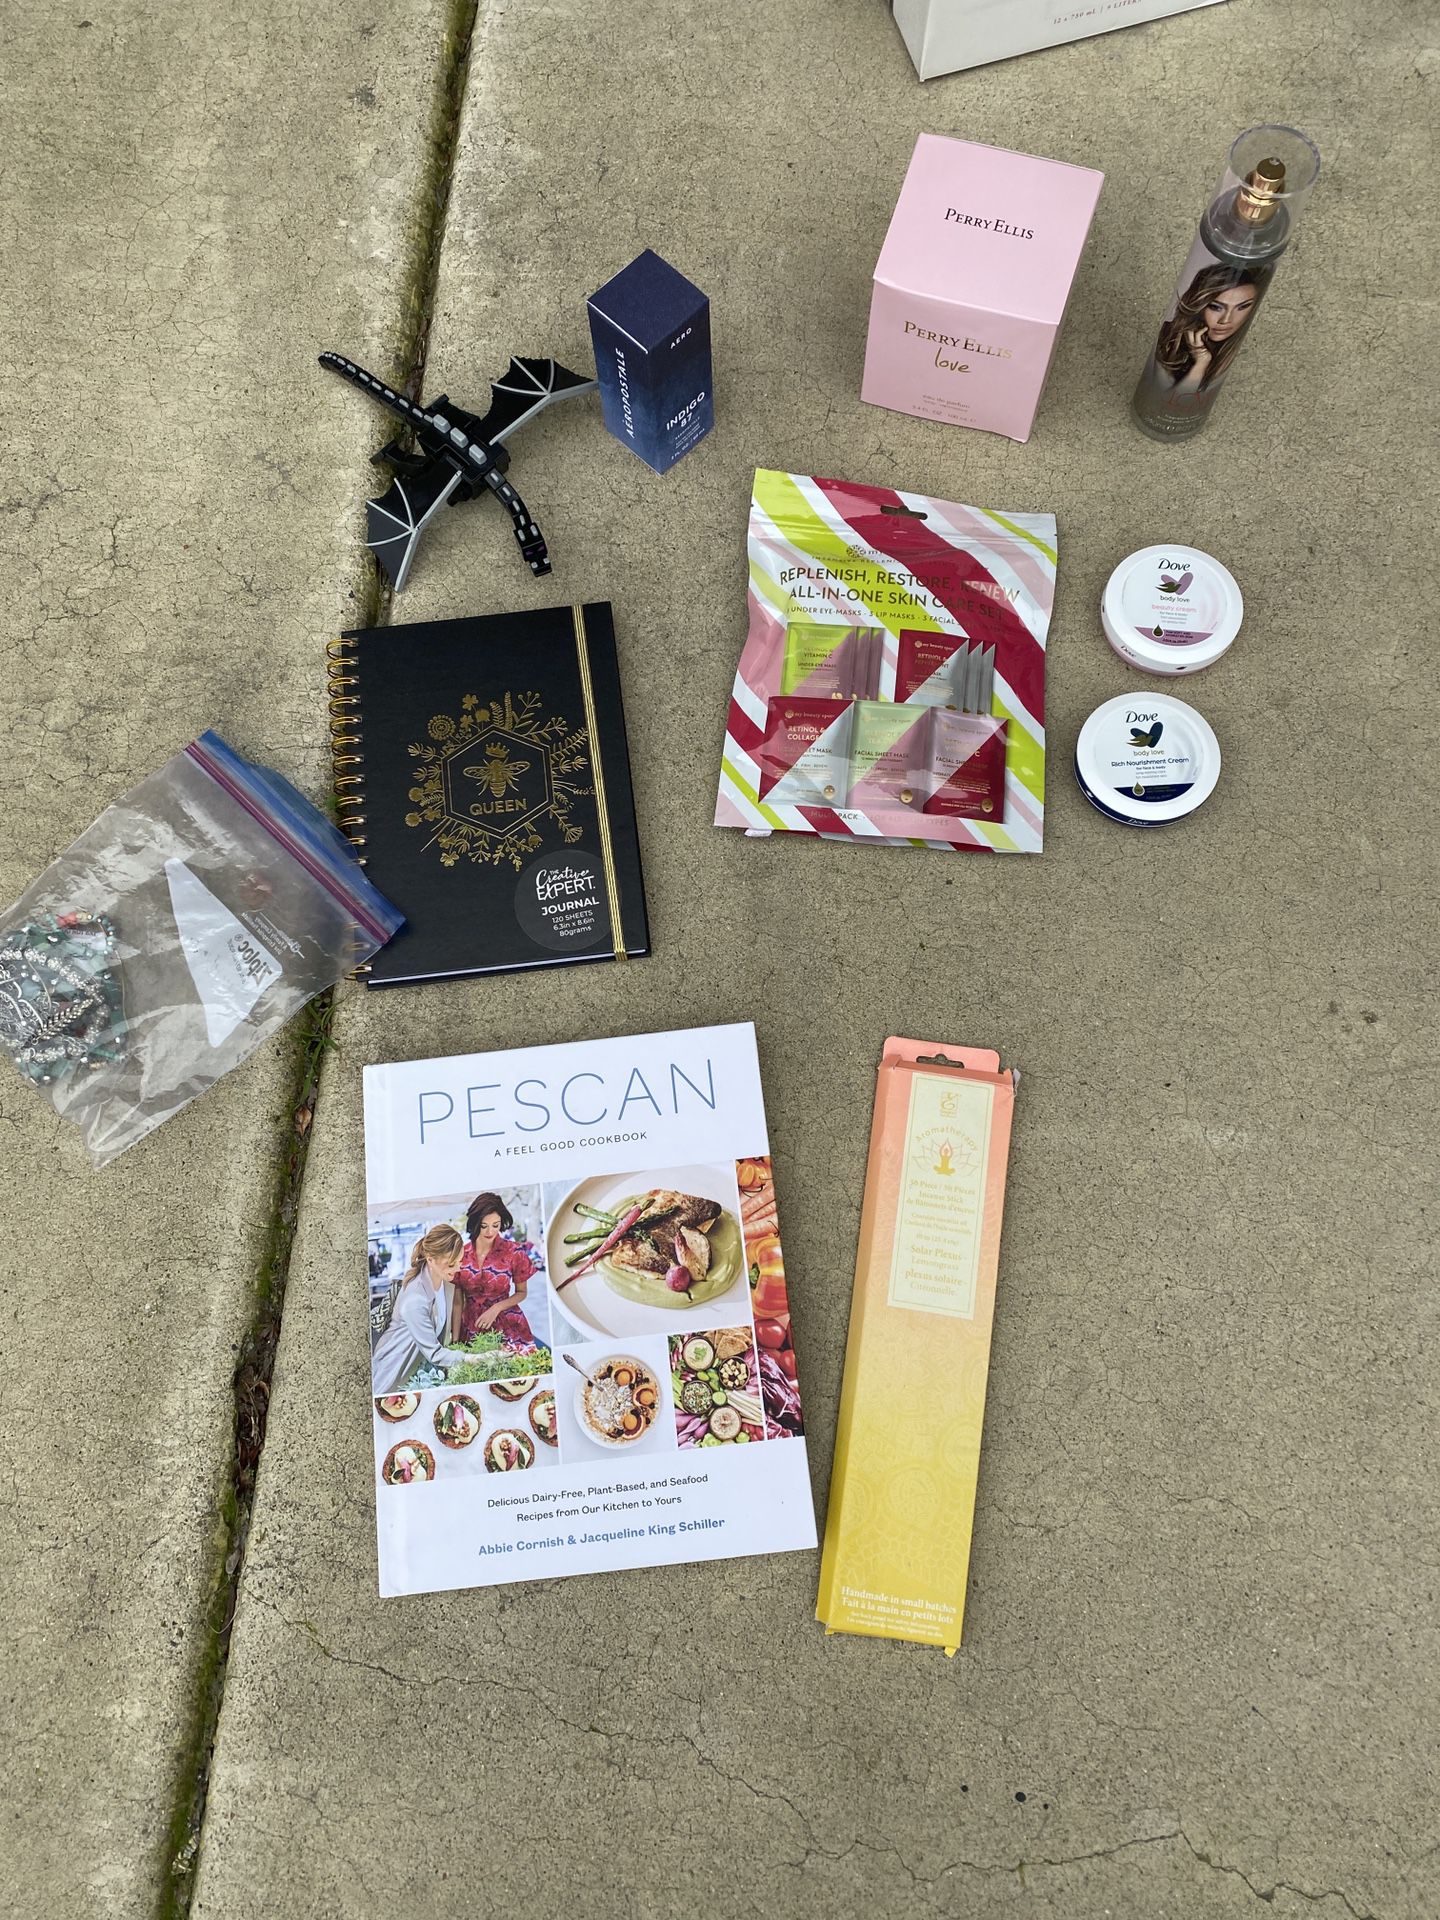 Perfume, Journal, Cook Book, And Face masks